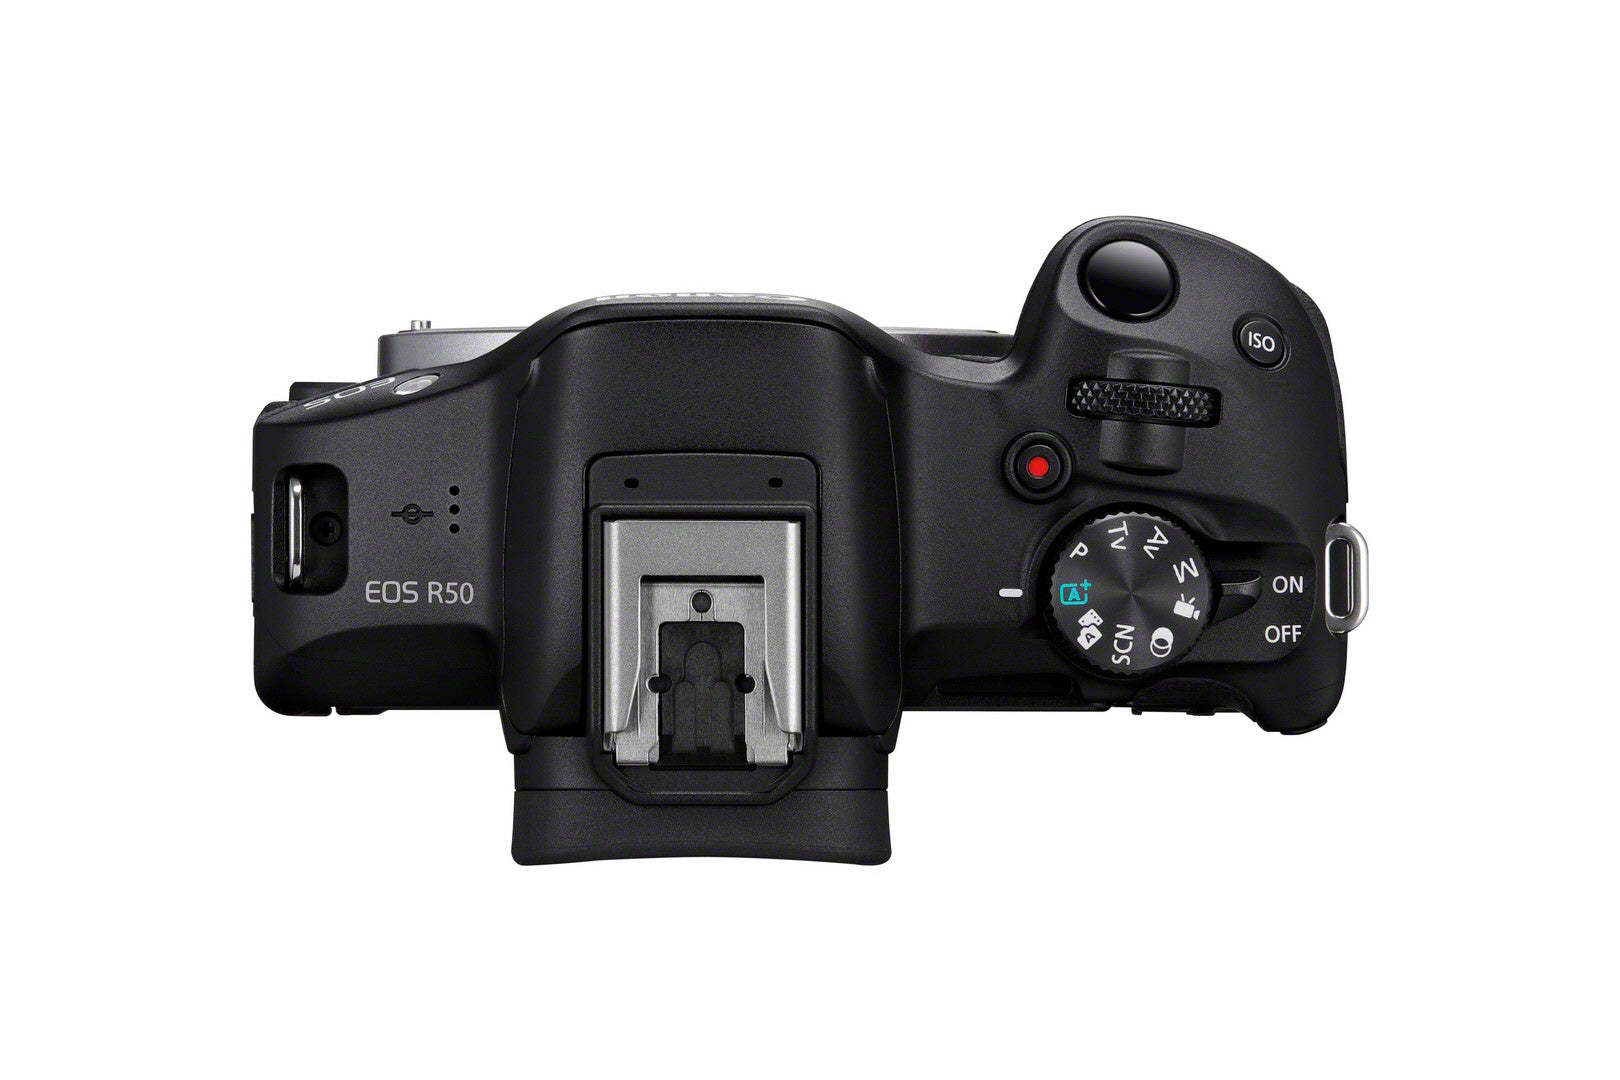 Canon EOS R50 Mirrorless APS-C Body Only - Product Photo 4 - Top down view of the camera with the controls and flash port visible